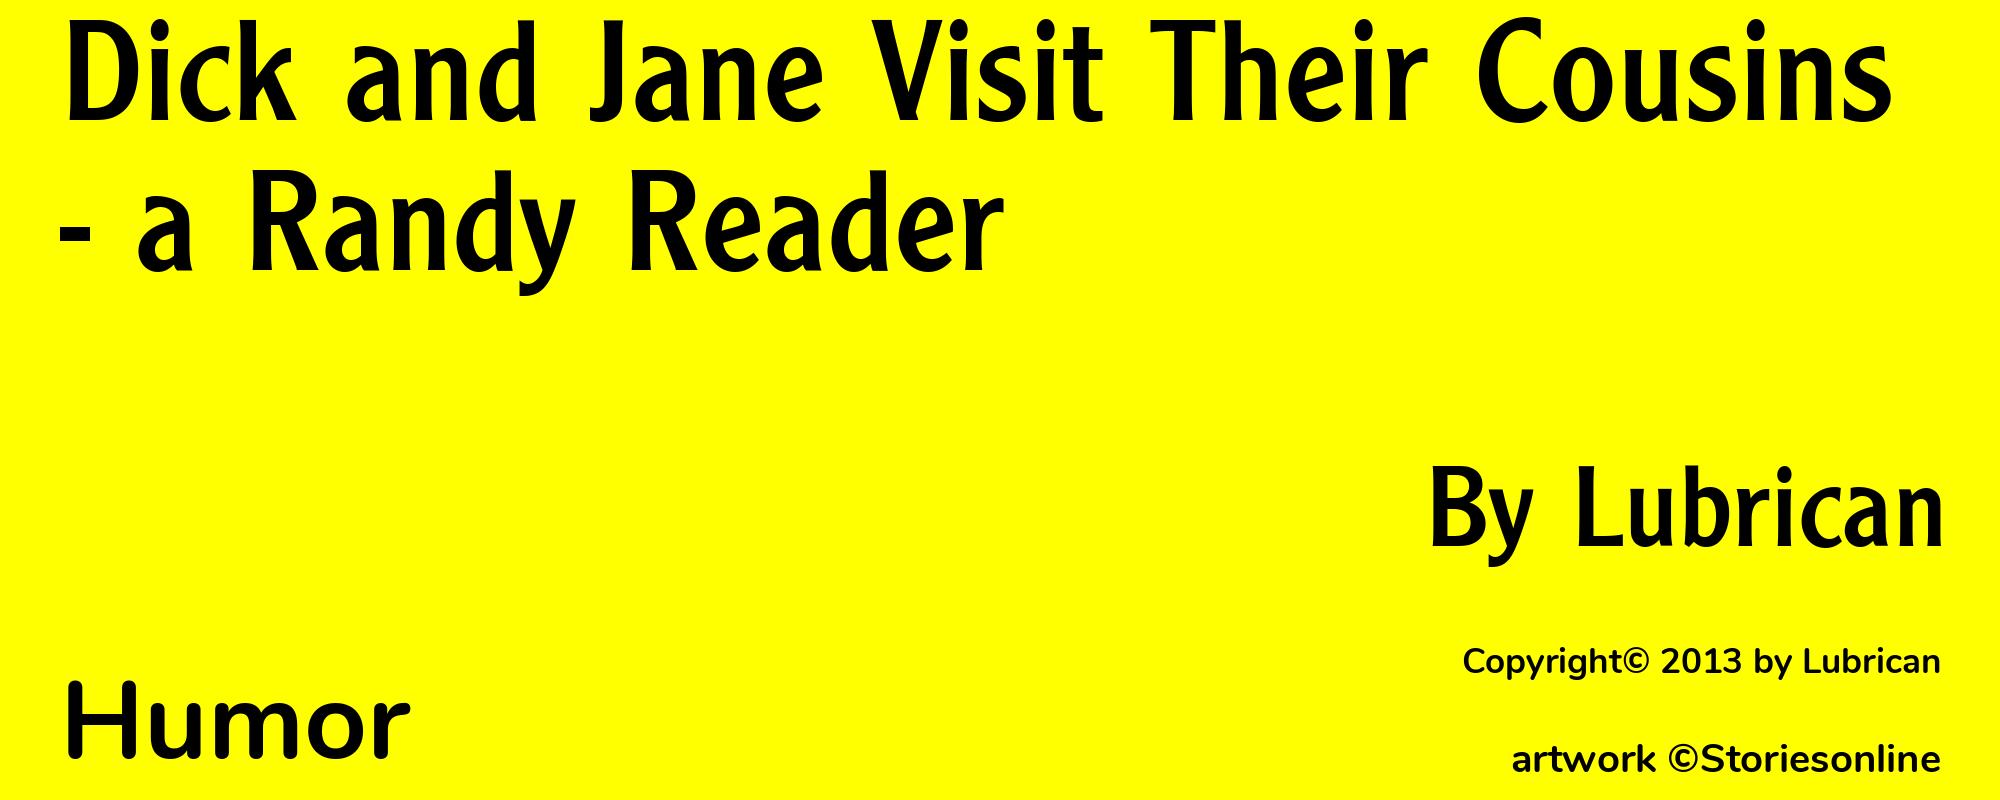 Dick and Jane Visit Their Cousins - a Randy Reader - Cover